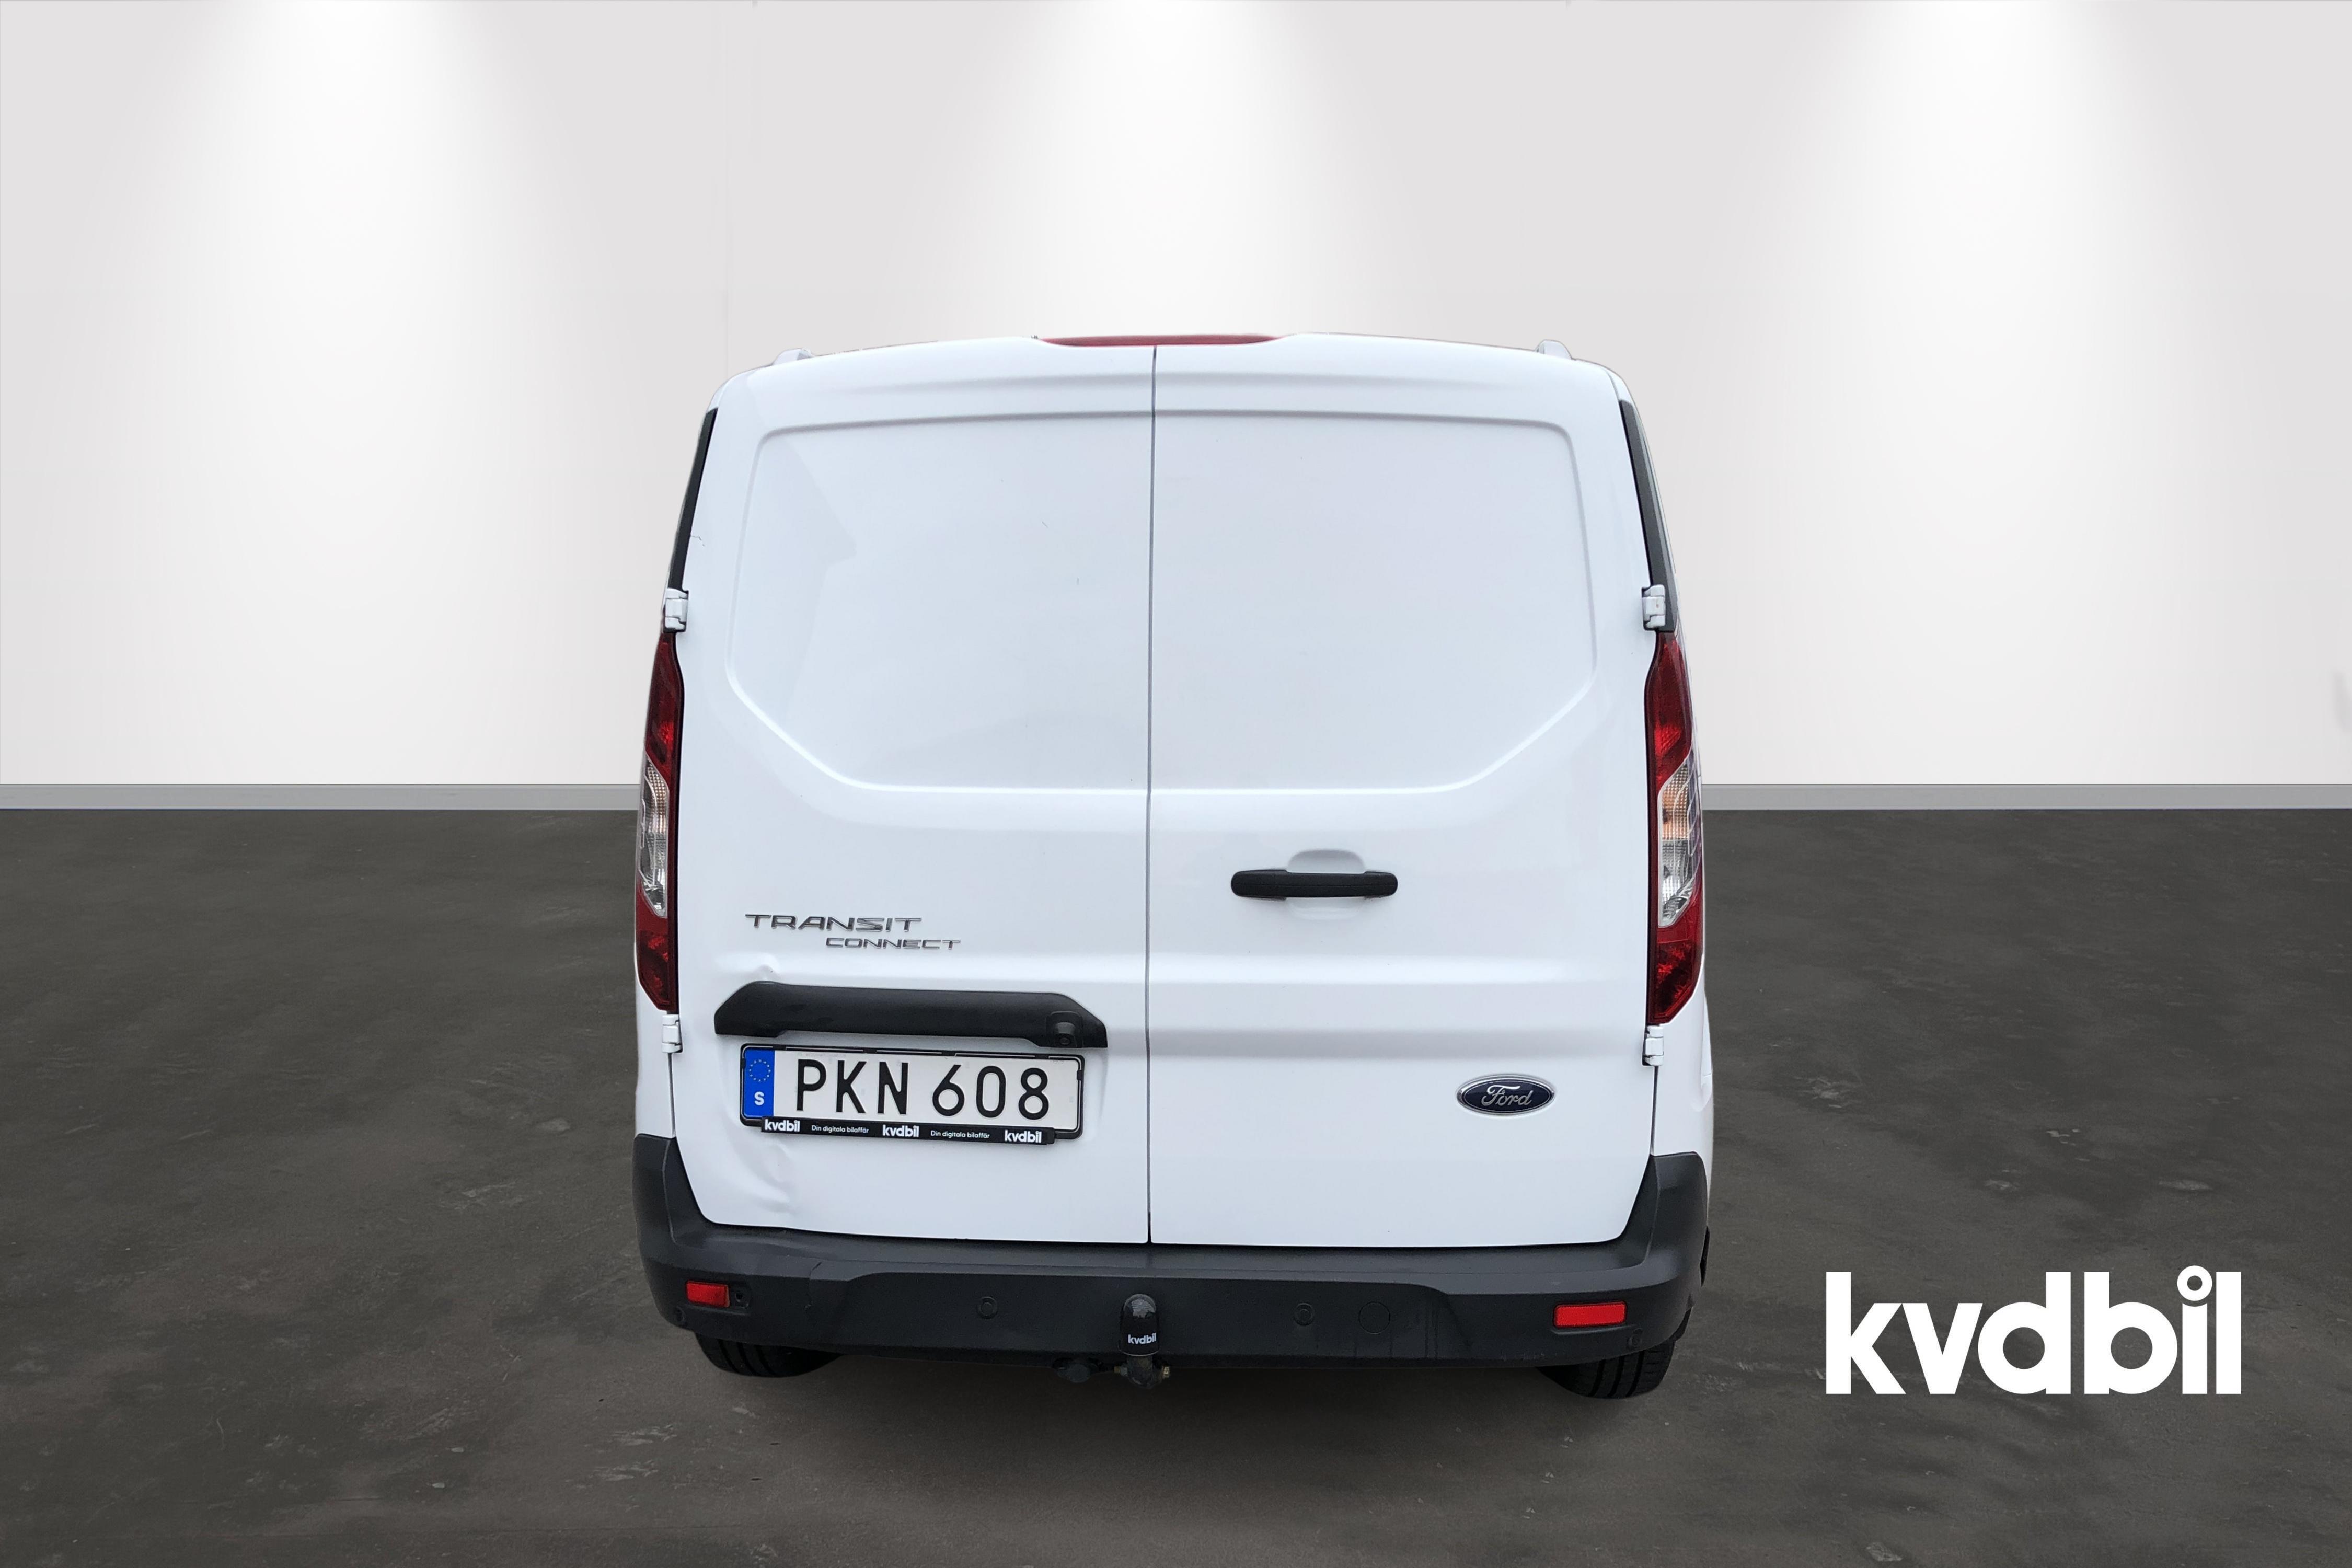 Ford Transit Connect 1.5 TDCi (100hk) - 152 850 km - Automatic - white - 2017